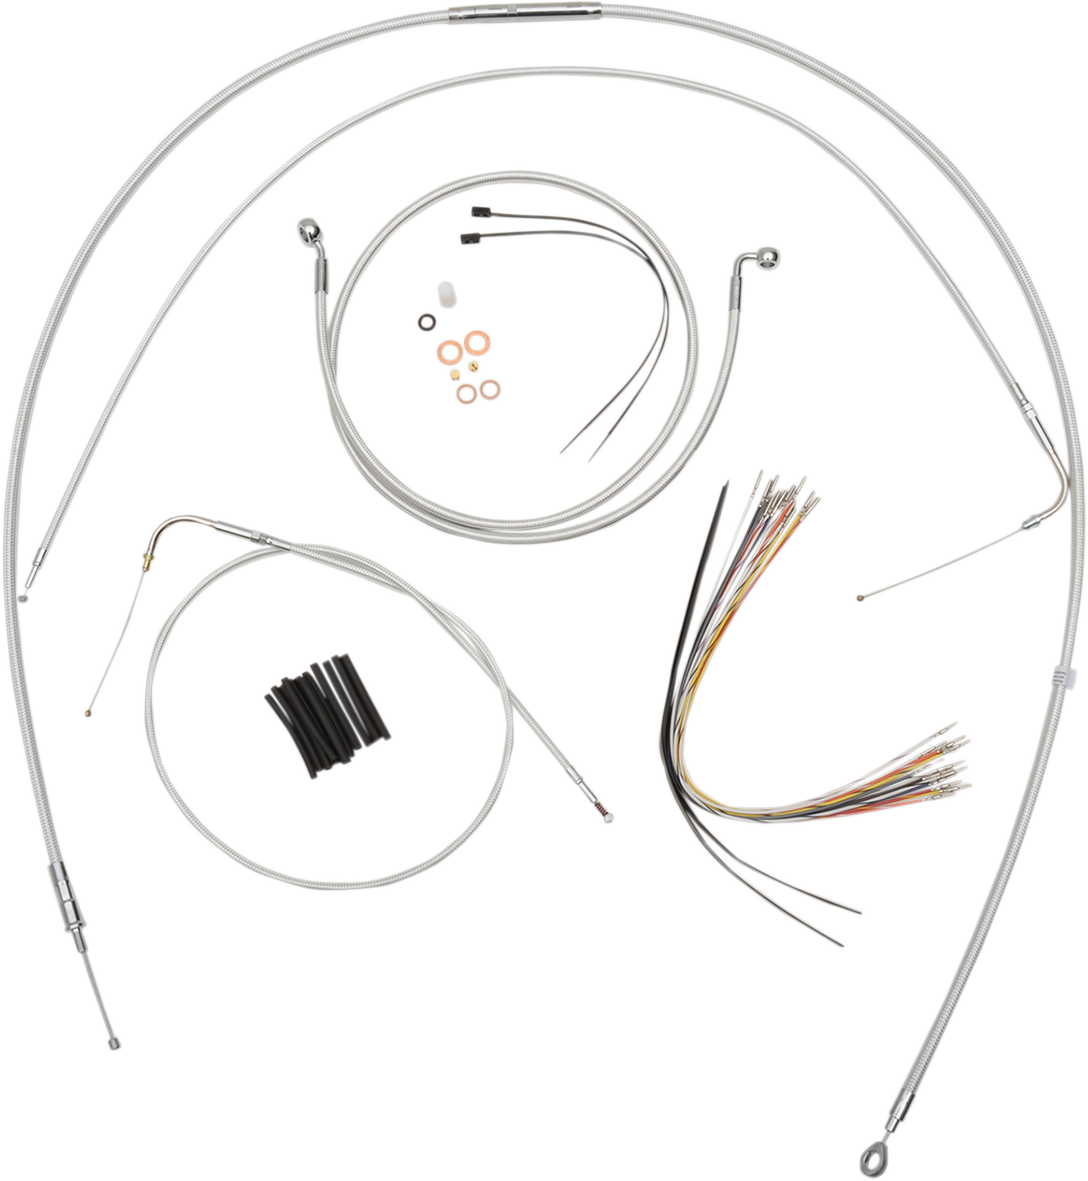 0662-0091 - MAGNUM Control Cable Kit - Sterling Chromite II? 387701